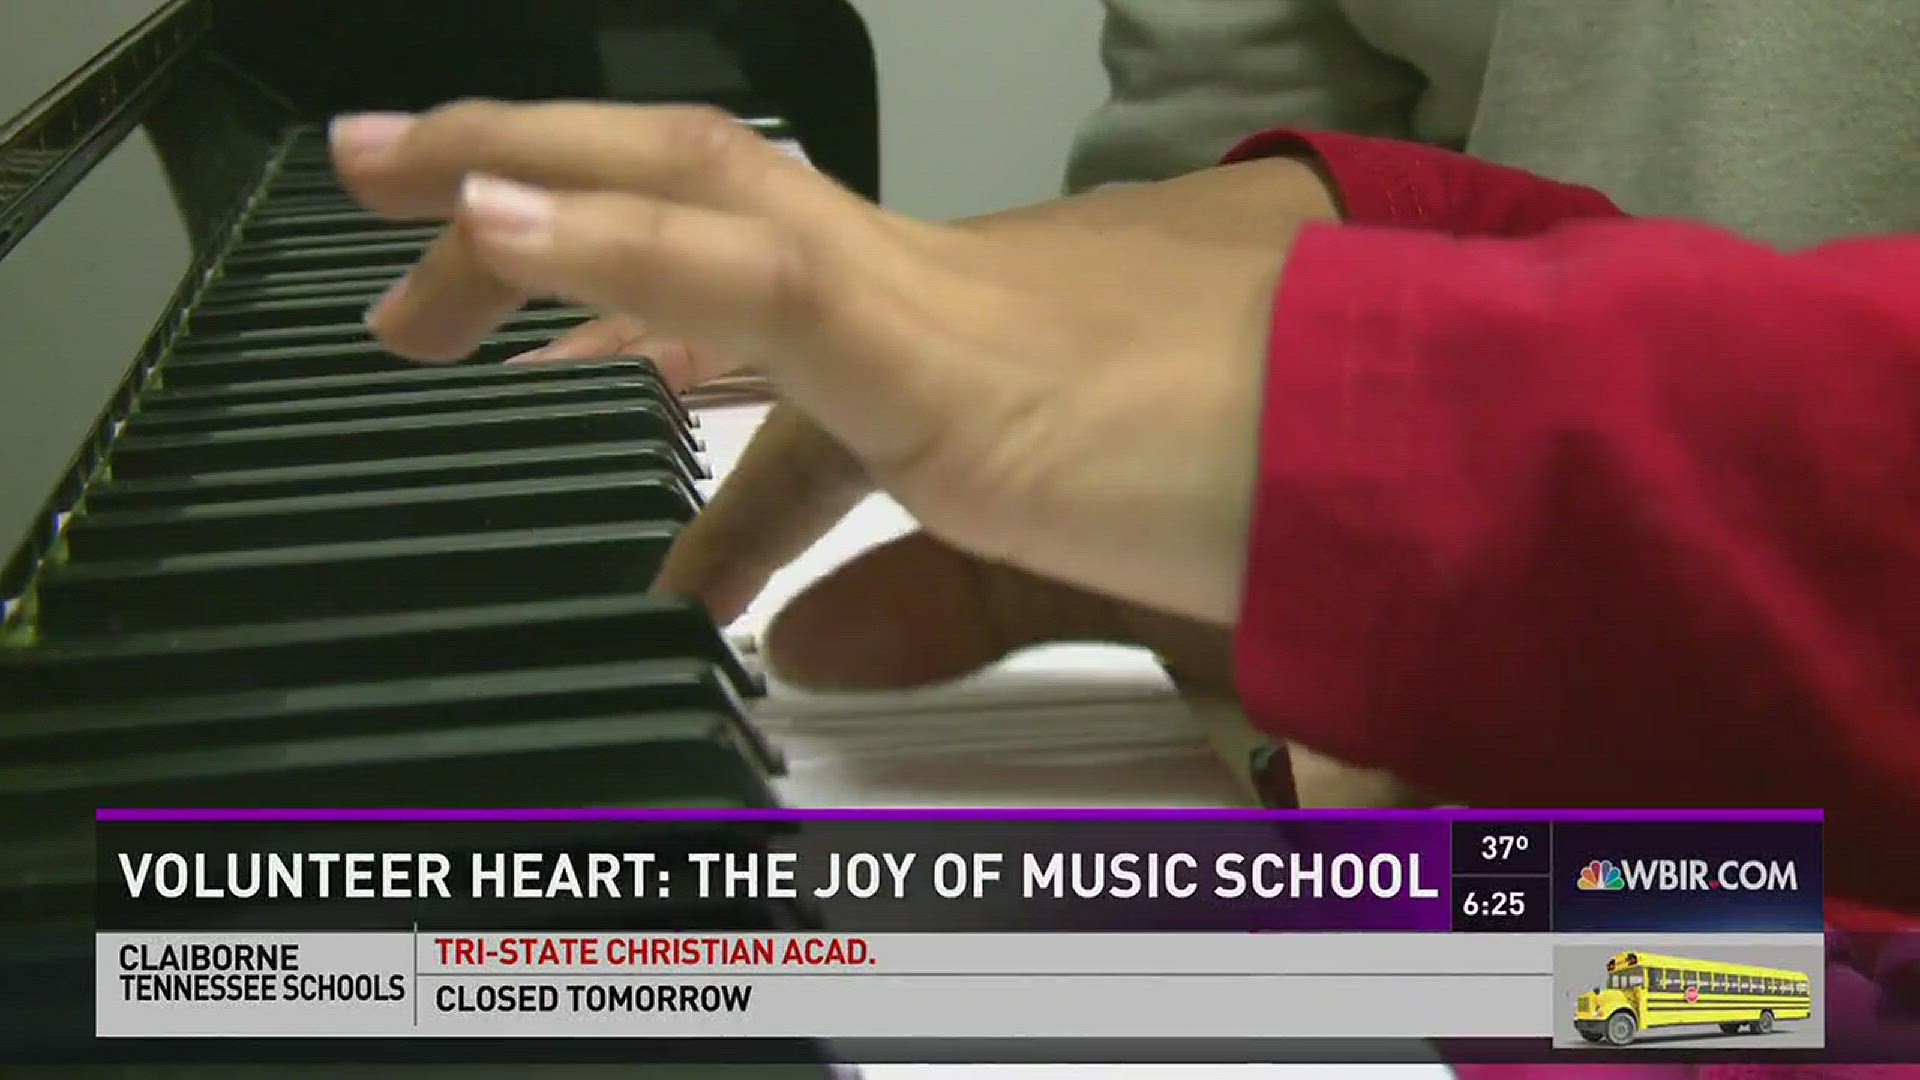 The Joy of Music School has been trying to expand students' access to musical instruments for the past decade. Jan. 21, 2016